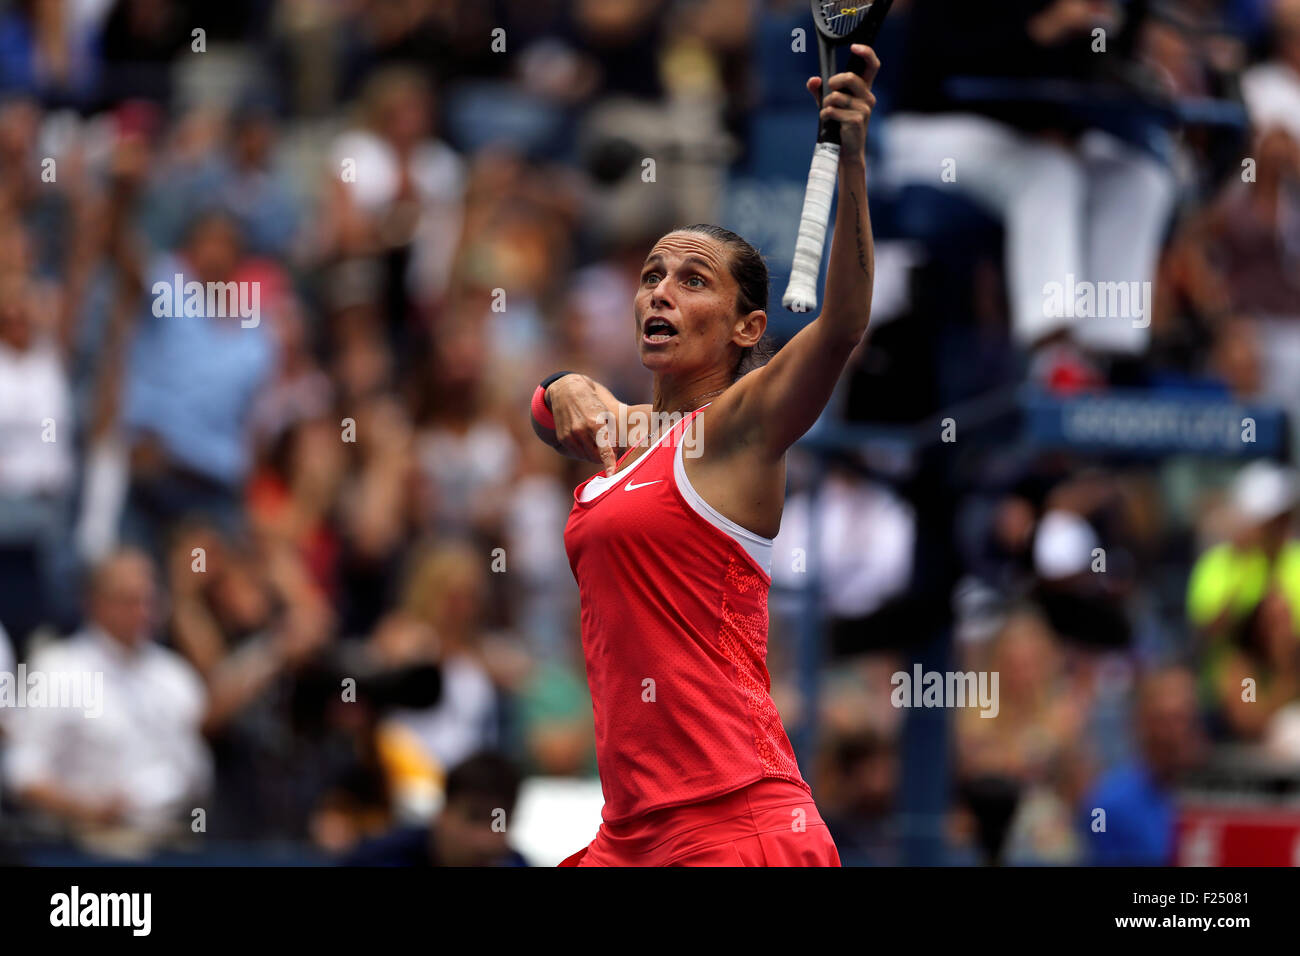 Flushing Meadows, New York, USA. 11th Sep, 2015. Roberta Vinci of Italy gestures to the crowd during her defeat of Serena Williams in their semifinal match at the U.S. Open in Flushing Meadows, New York on the afternoon of September 11th, 2015.  Vinci won the match 2-6, 6-4, 6-4. Credit:  Adam Stoltman/Alamy Live News Stock Photo